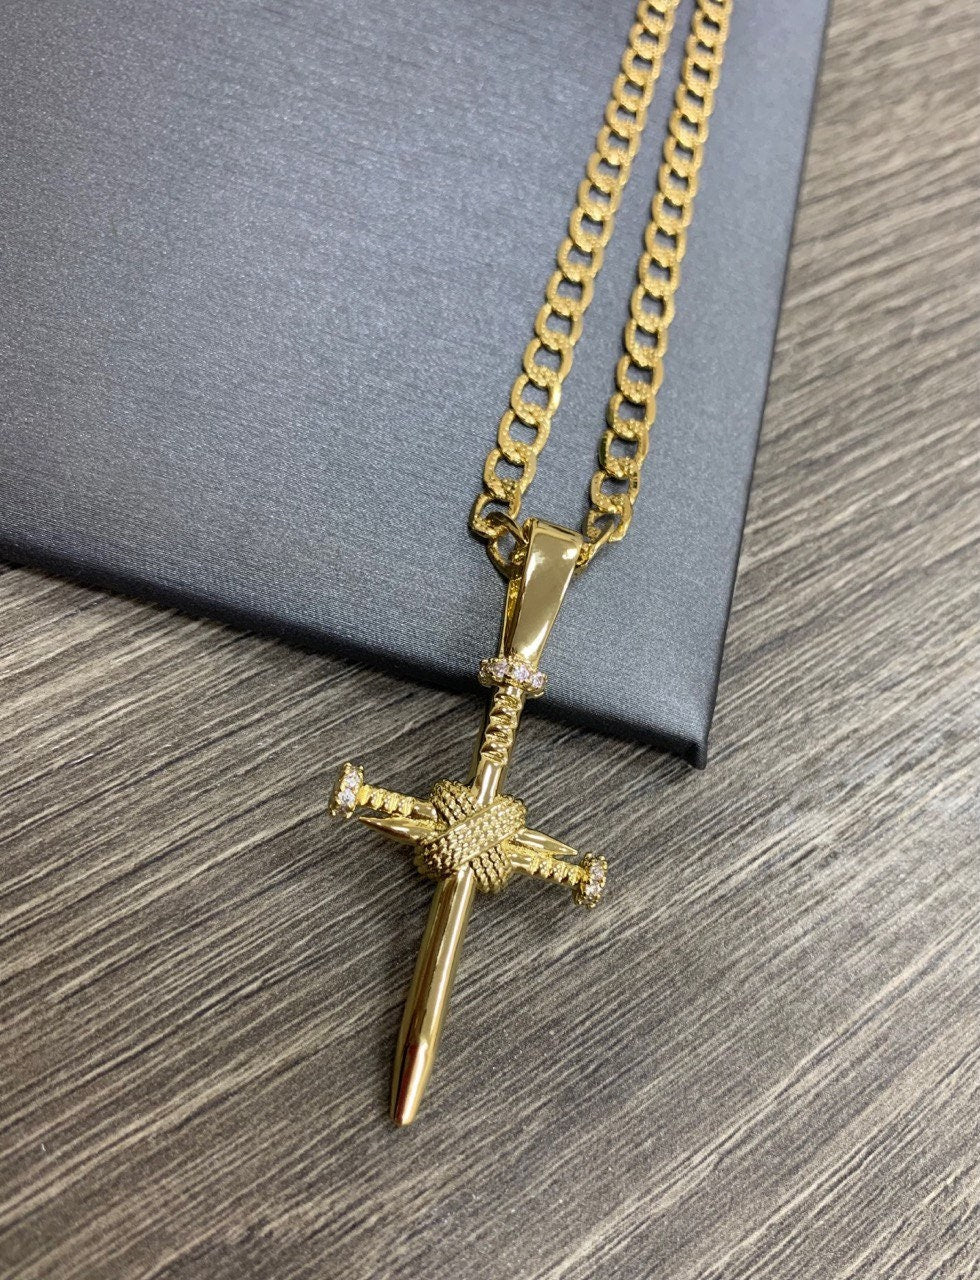 18k Gold Filled Fancy Cubic Zirconia Cross Charms Wholesale Jewelry Supplies